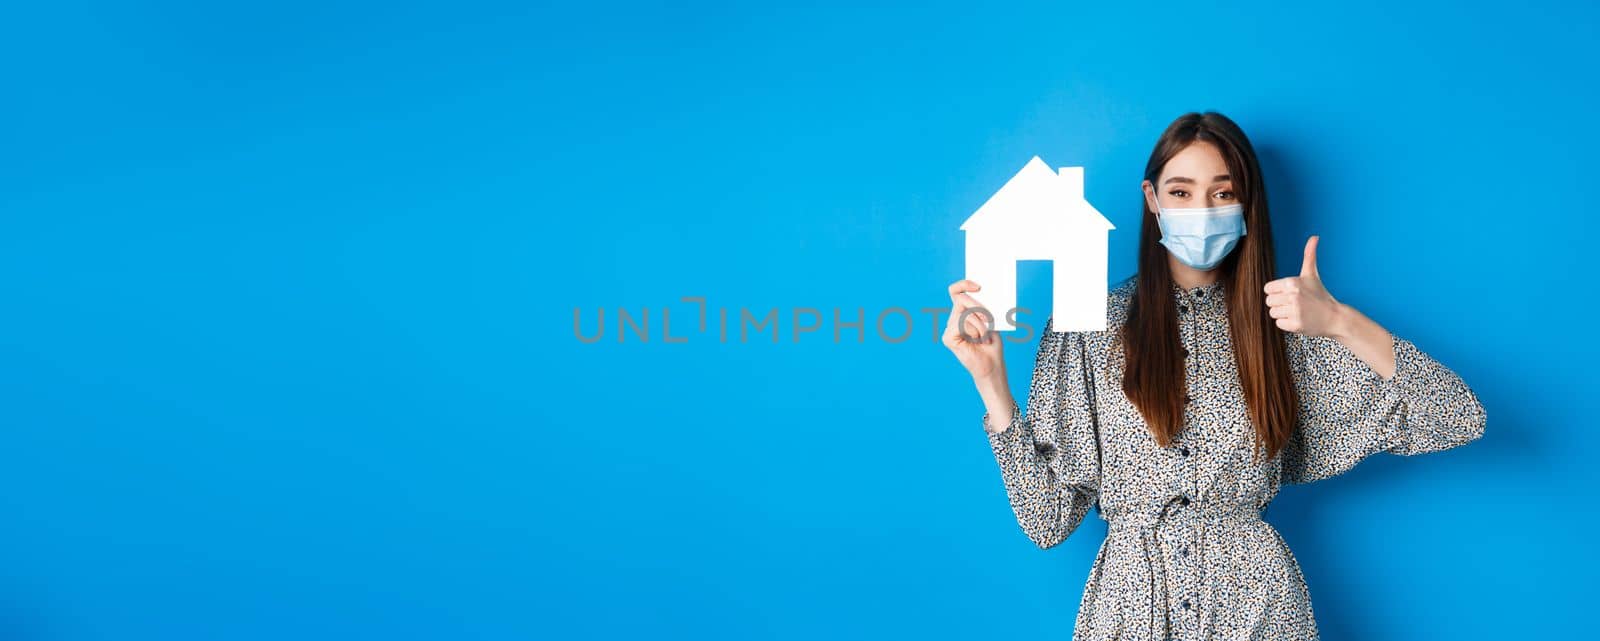 Real estate, covid-19 and pandemic concept. Cheerful woman in medical mask showing paper house cutout and thumbs up, recommend agency or realtor website, blue background.